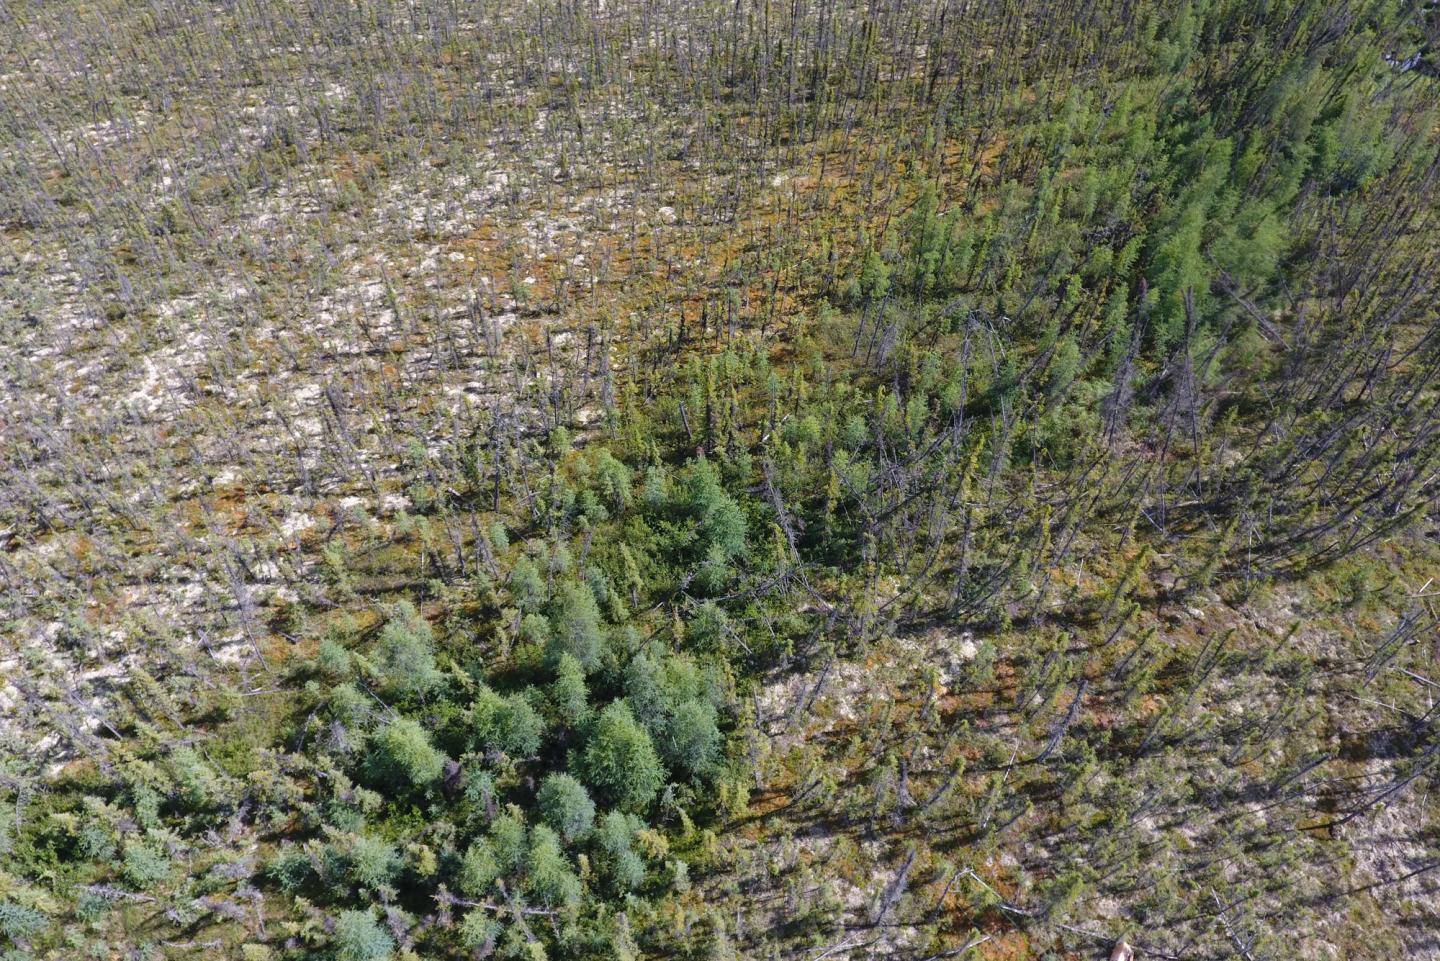 an aerial view of a stretch of woody forest that is thick in the middle but becomes more sparse going outward